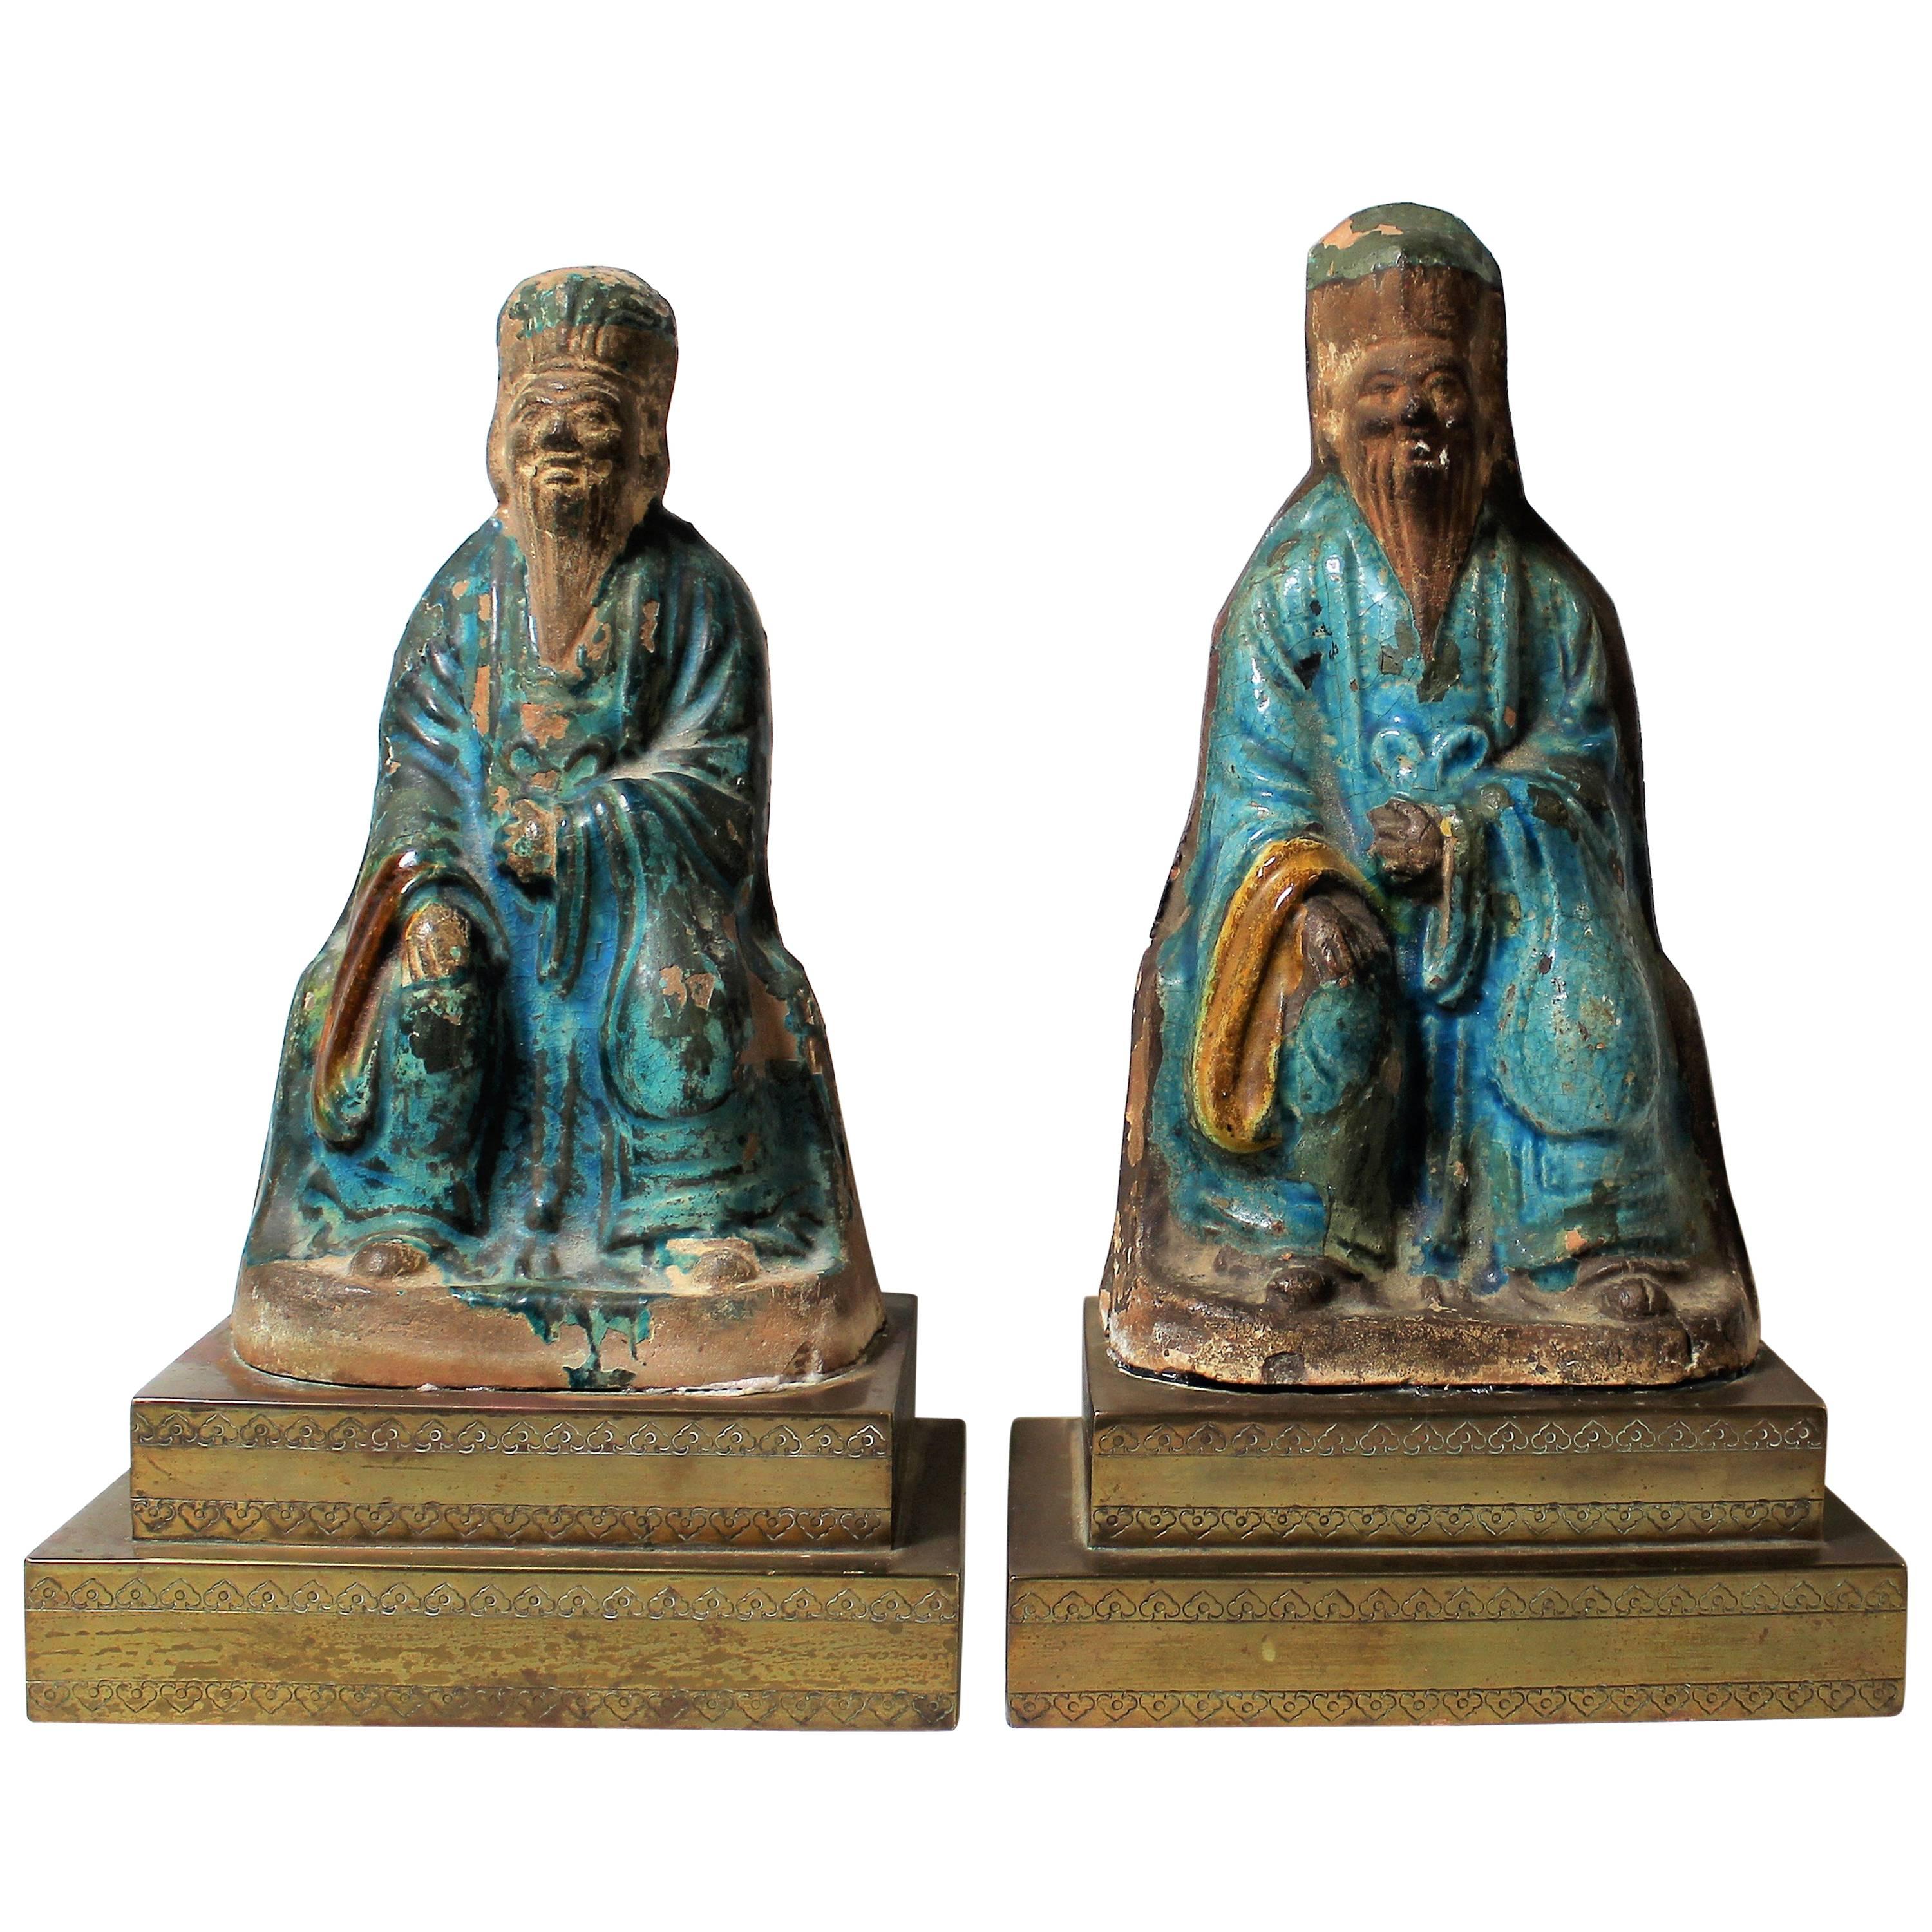 Pair of Chinese Ming Dynasty Ceramic Sculptures of Confucius